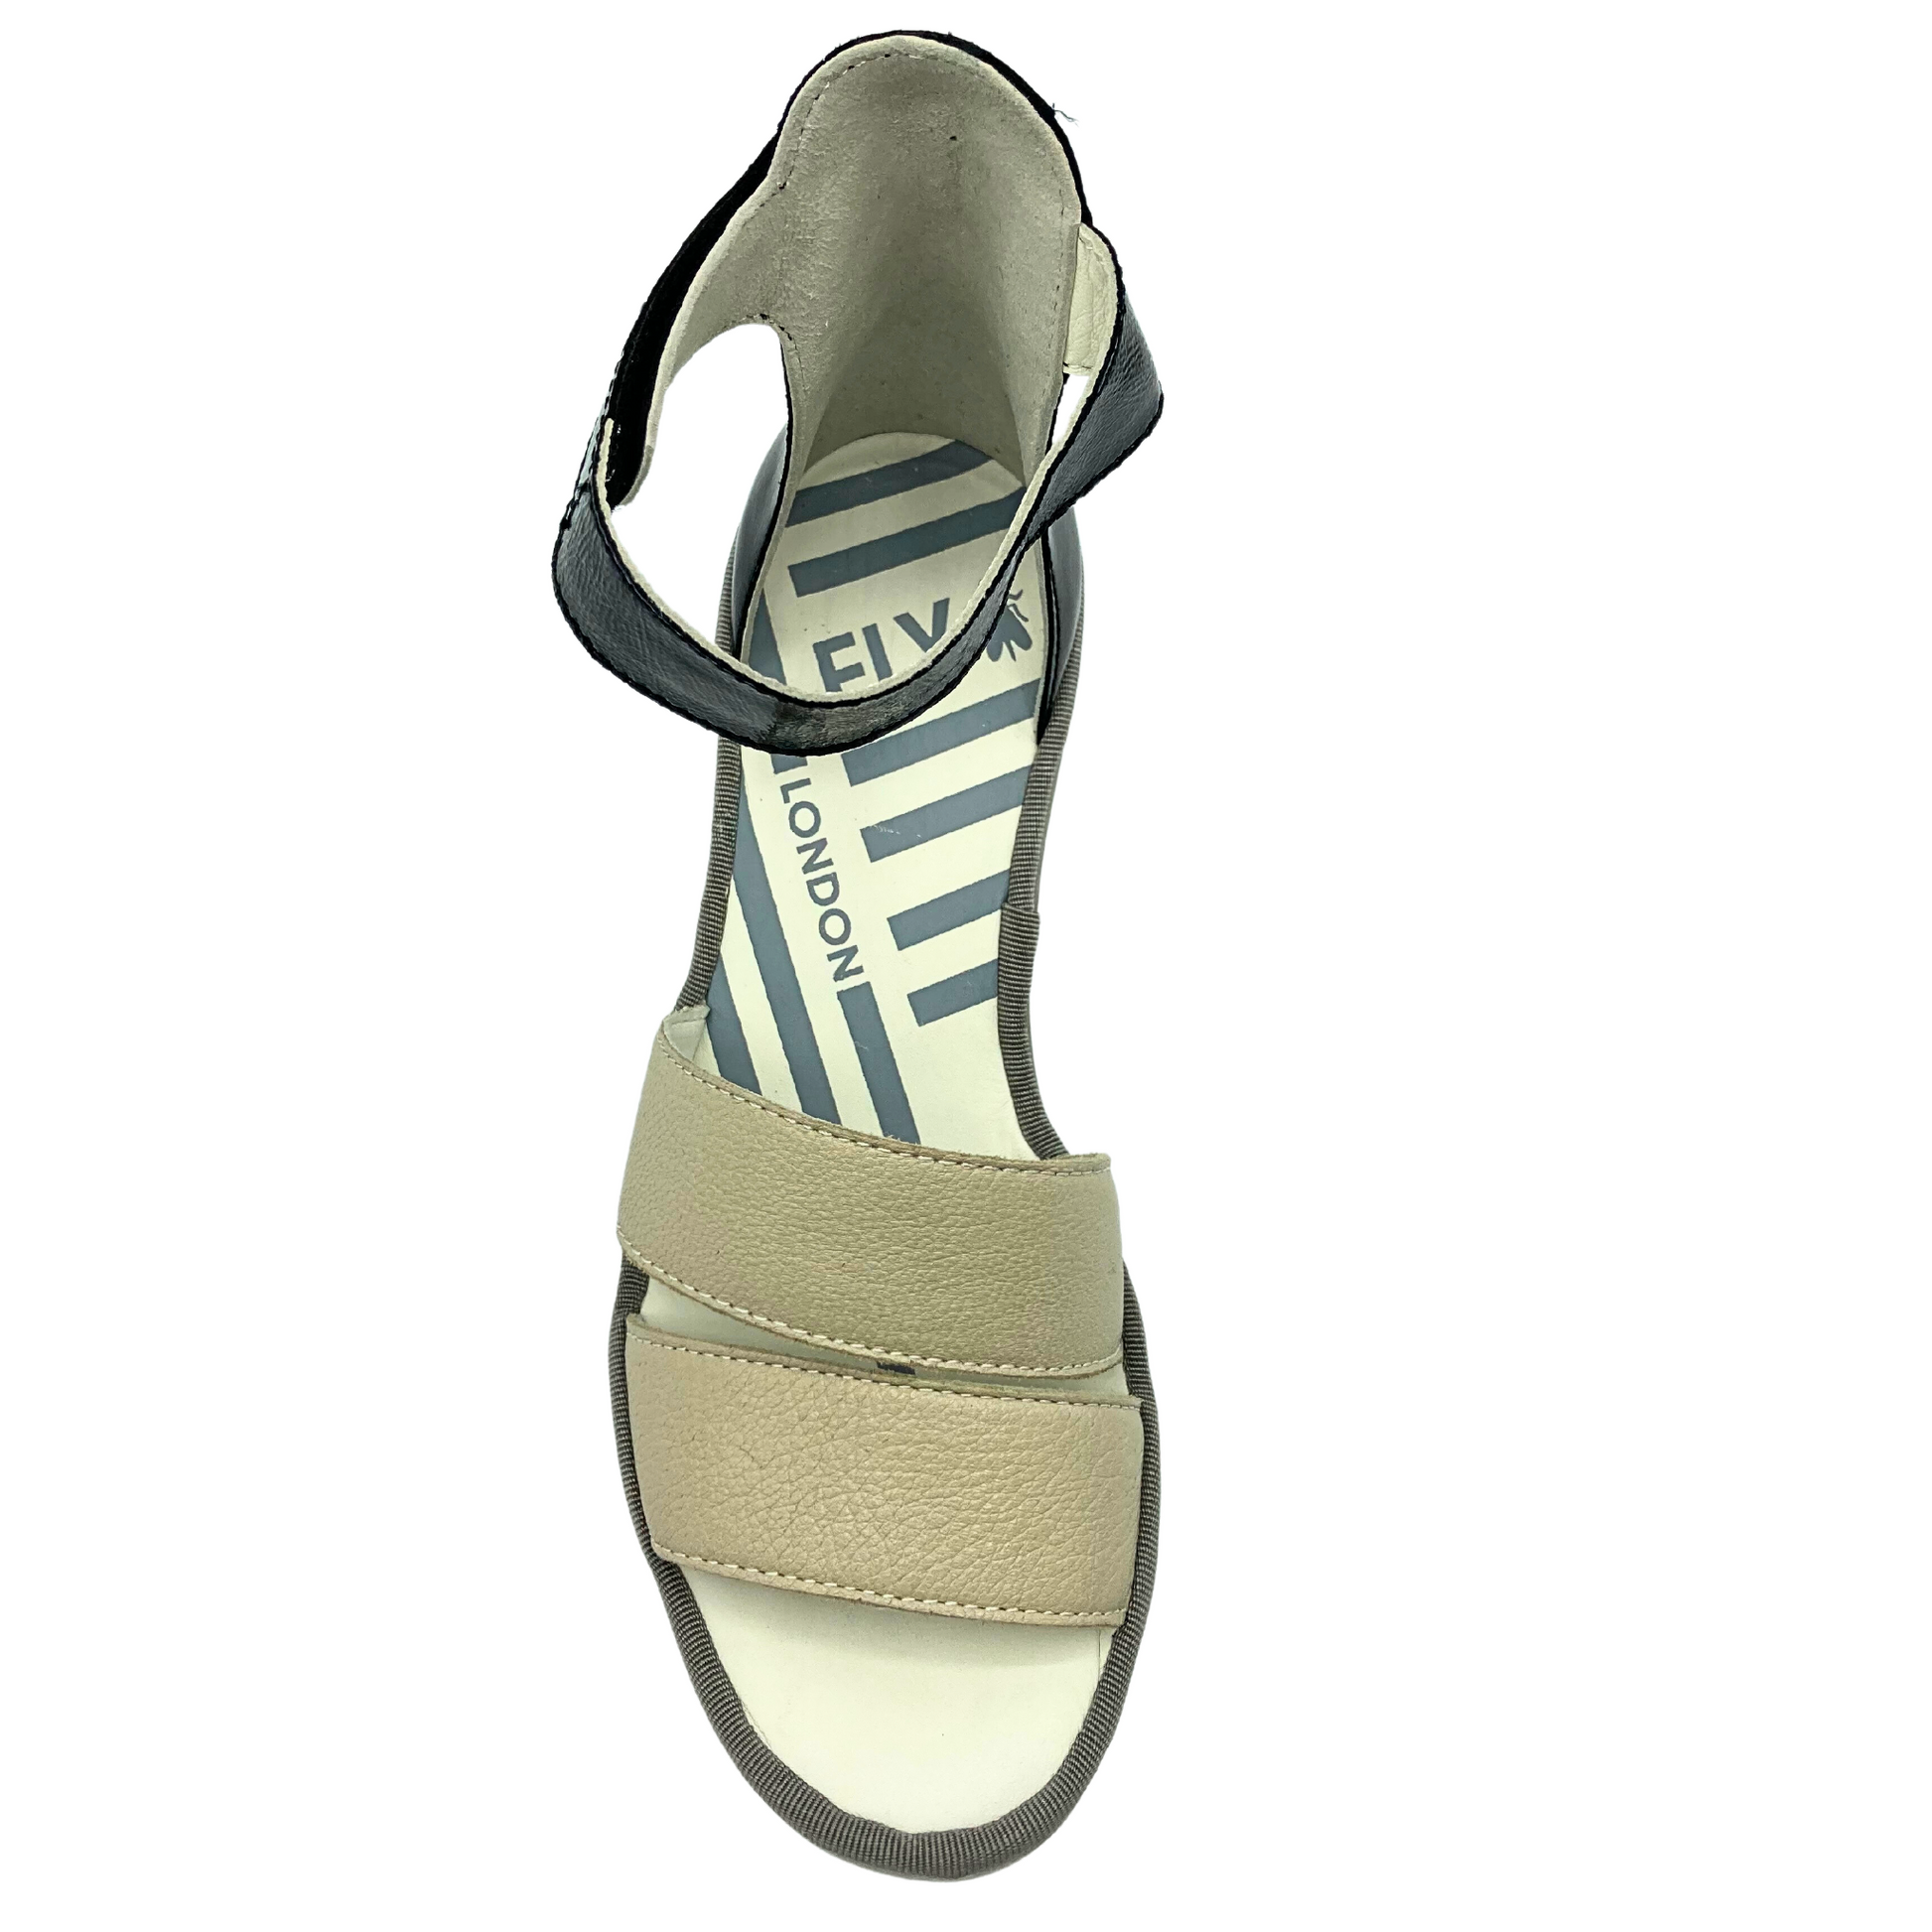 Top down view of two-tone sandal.  Open toe but closed in heel.  Velcro adjustment at ankle strap